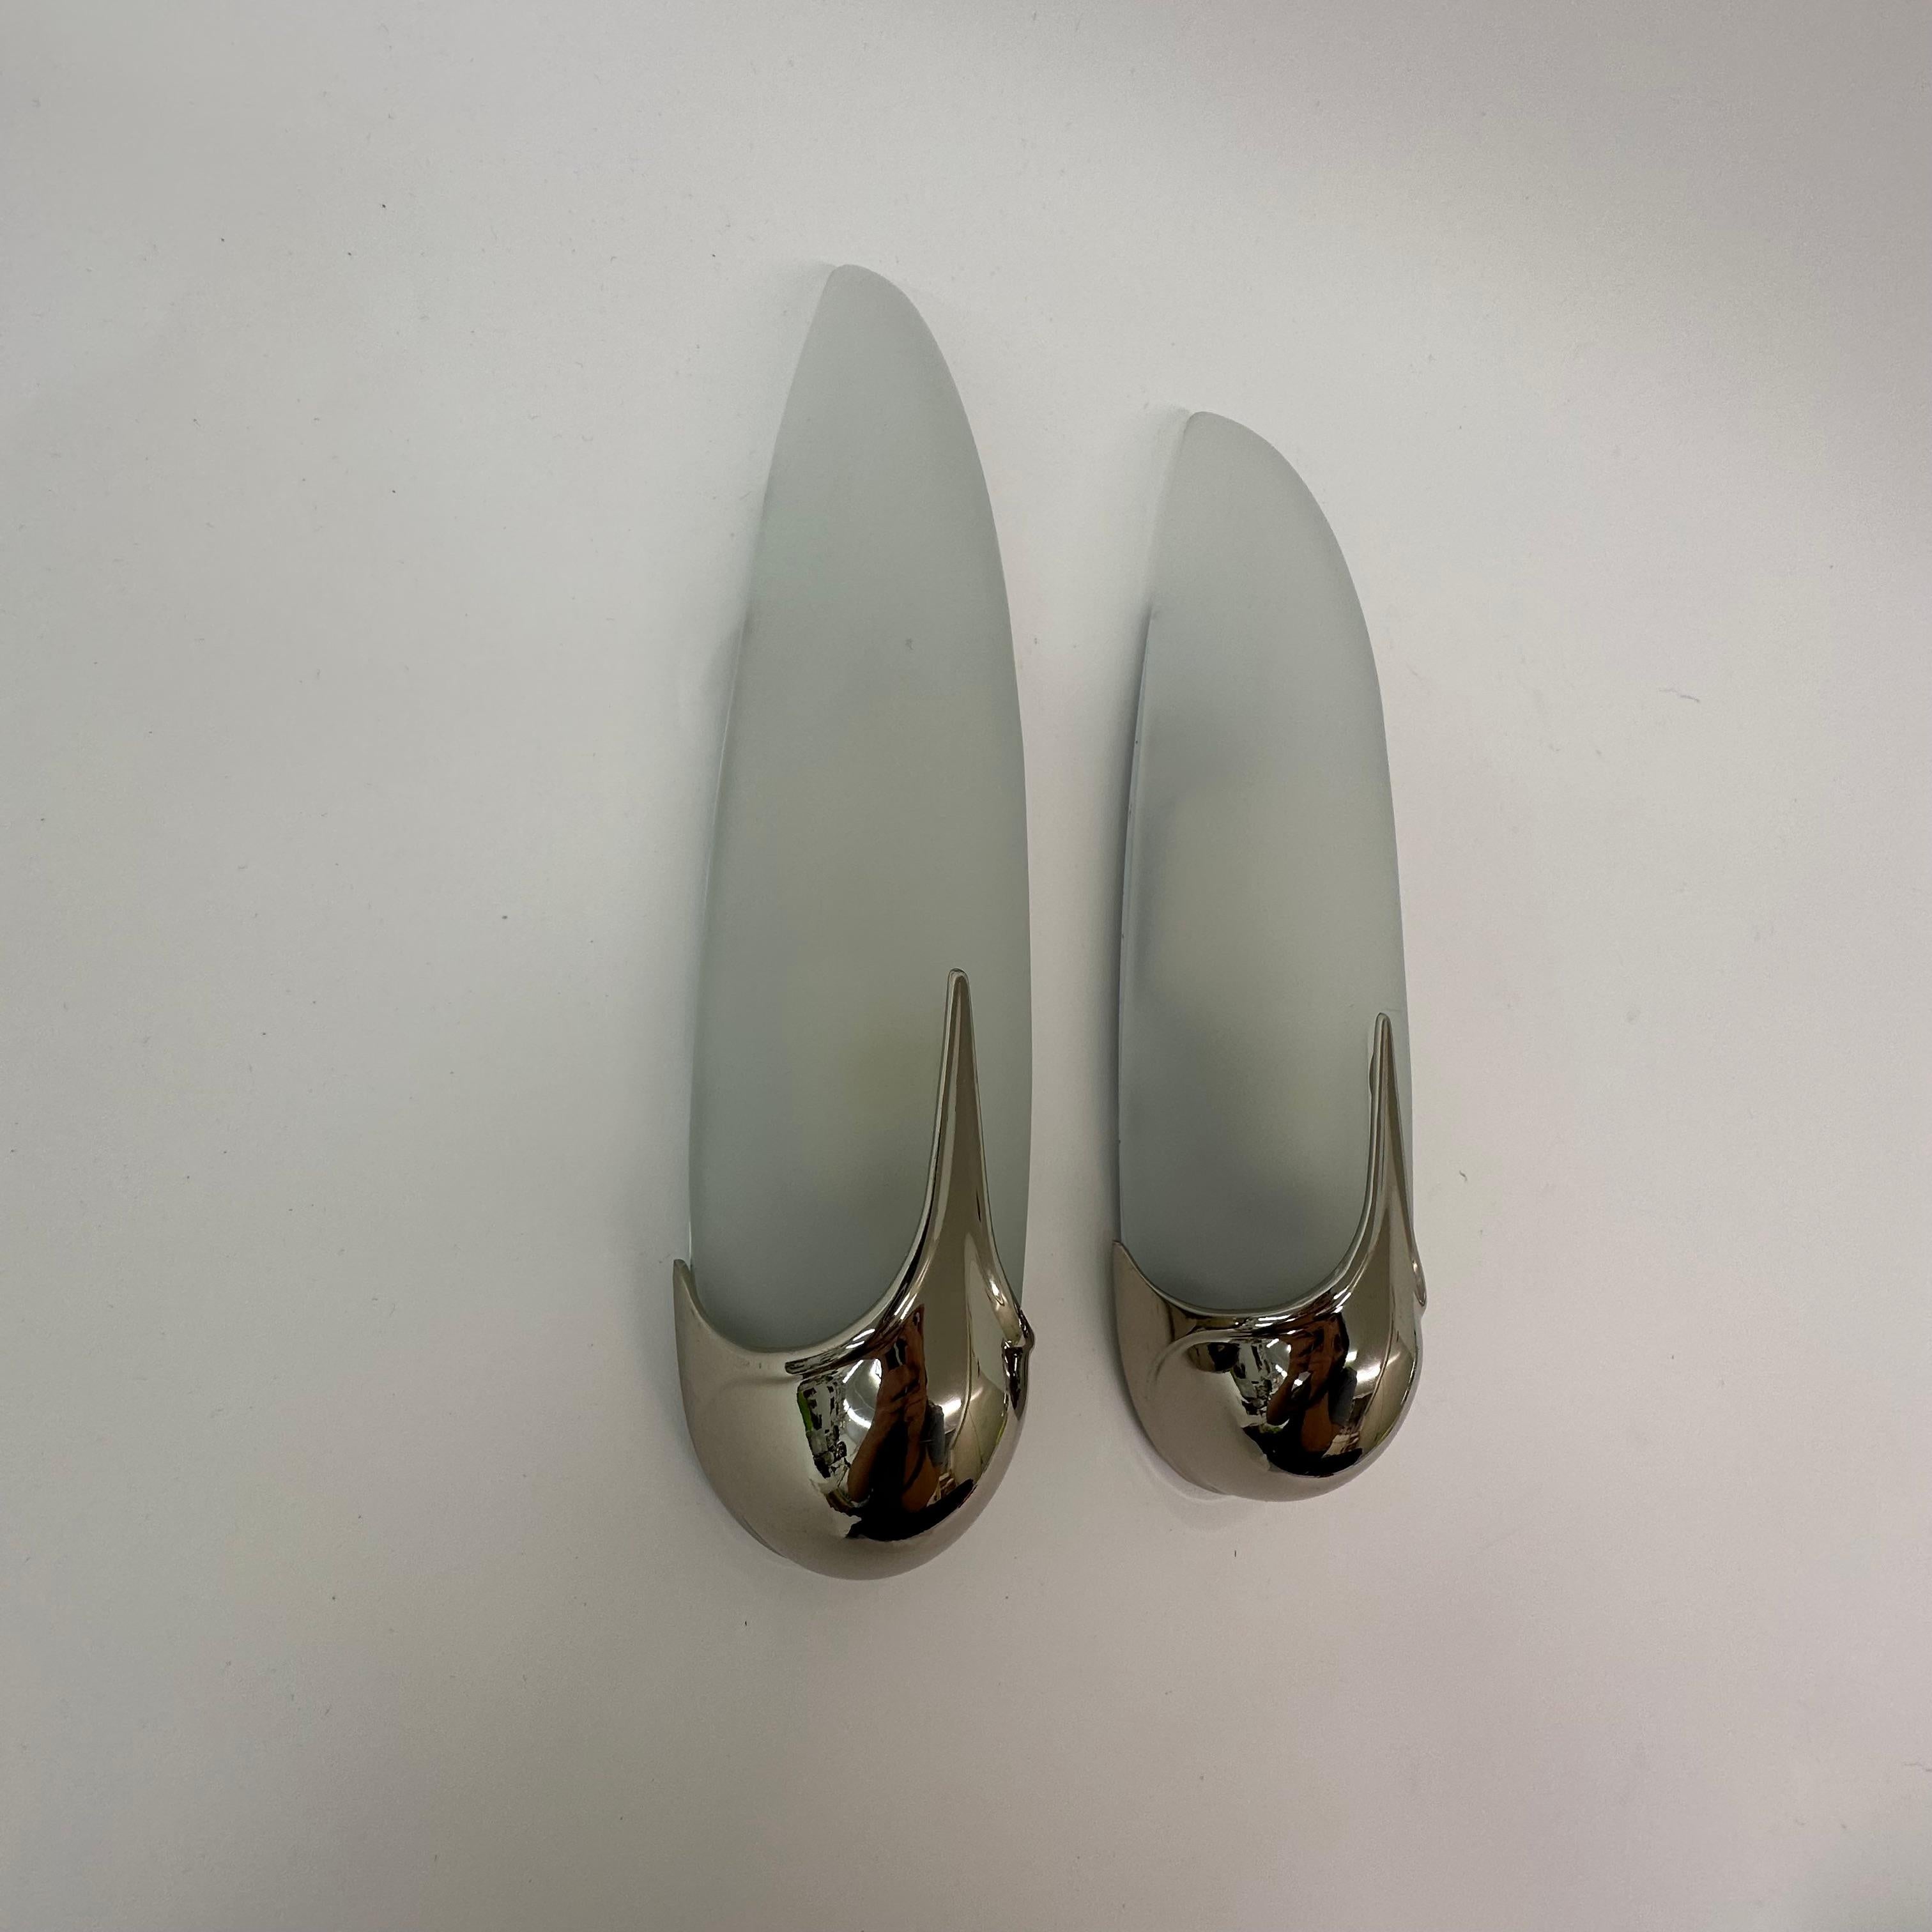 Pair of Idearte Sconces Wall Lamps, Spain, 1980s For Sale 1